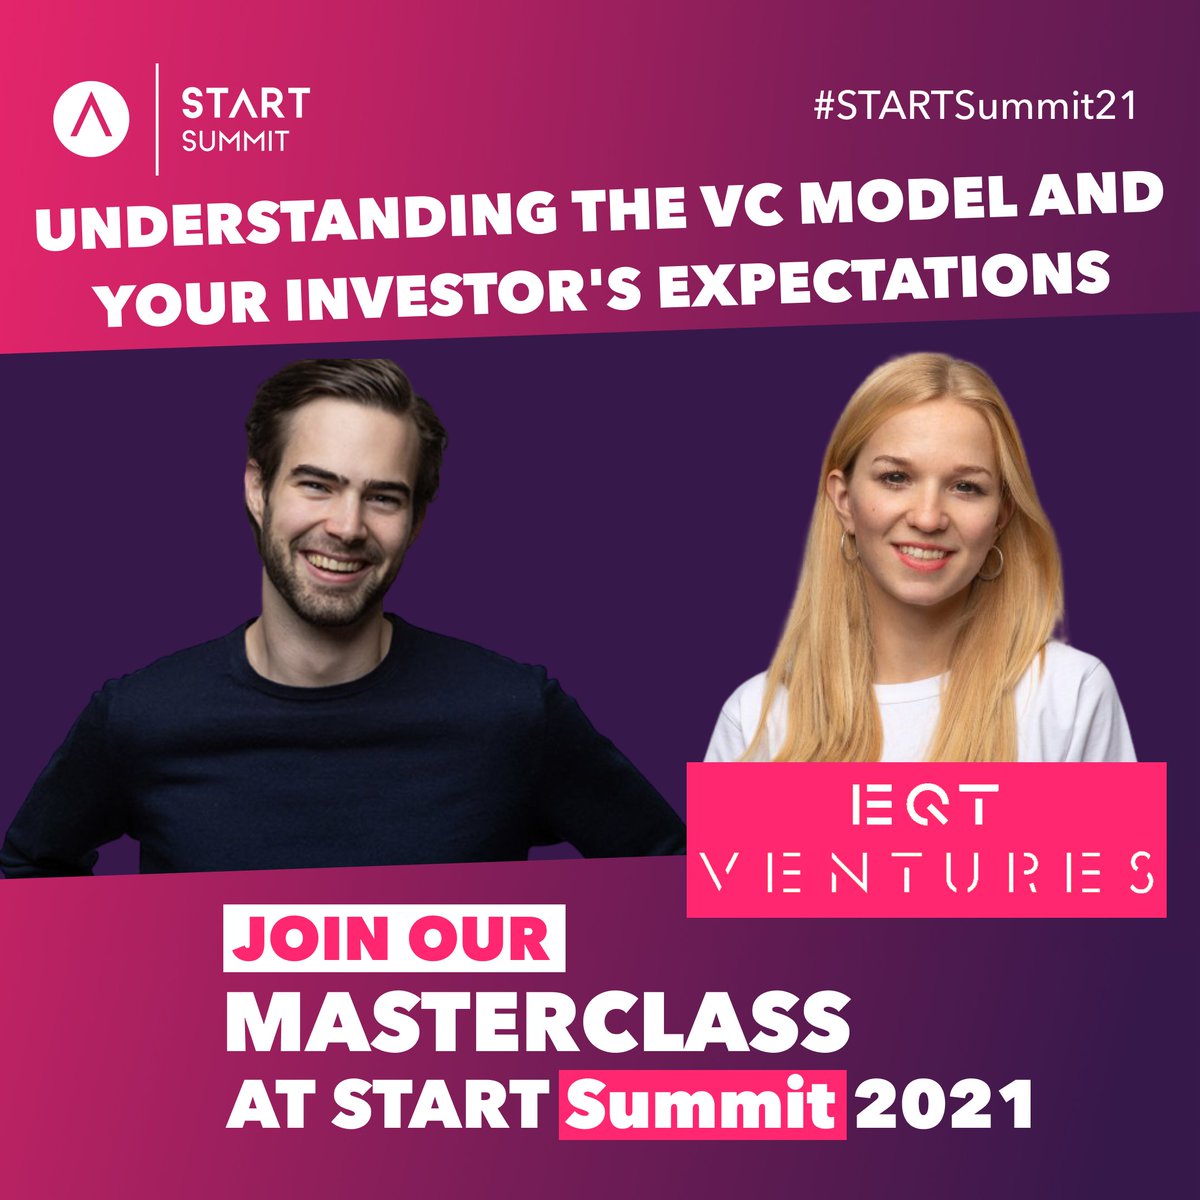 Join their Workshop hosted by Konstantin Zedelius and Jenny Dreier (Venture Leads at EQT Ventures) on Wednesday, 24th of March about 'Understanding the VC model and your investor's expectations'. Get your ticket today and join us and EQT Ventures at START Summit 2021!